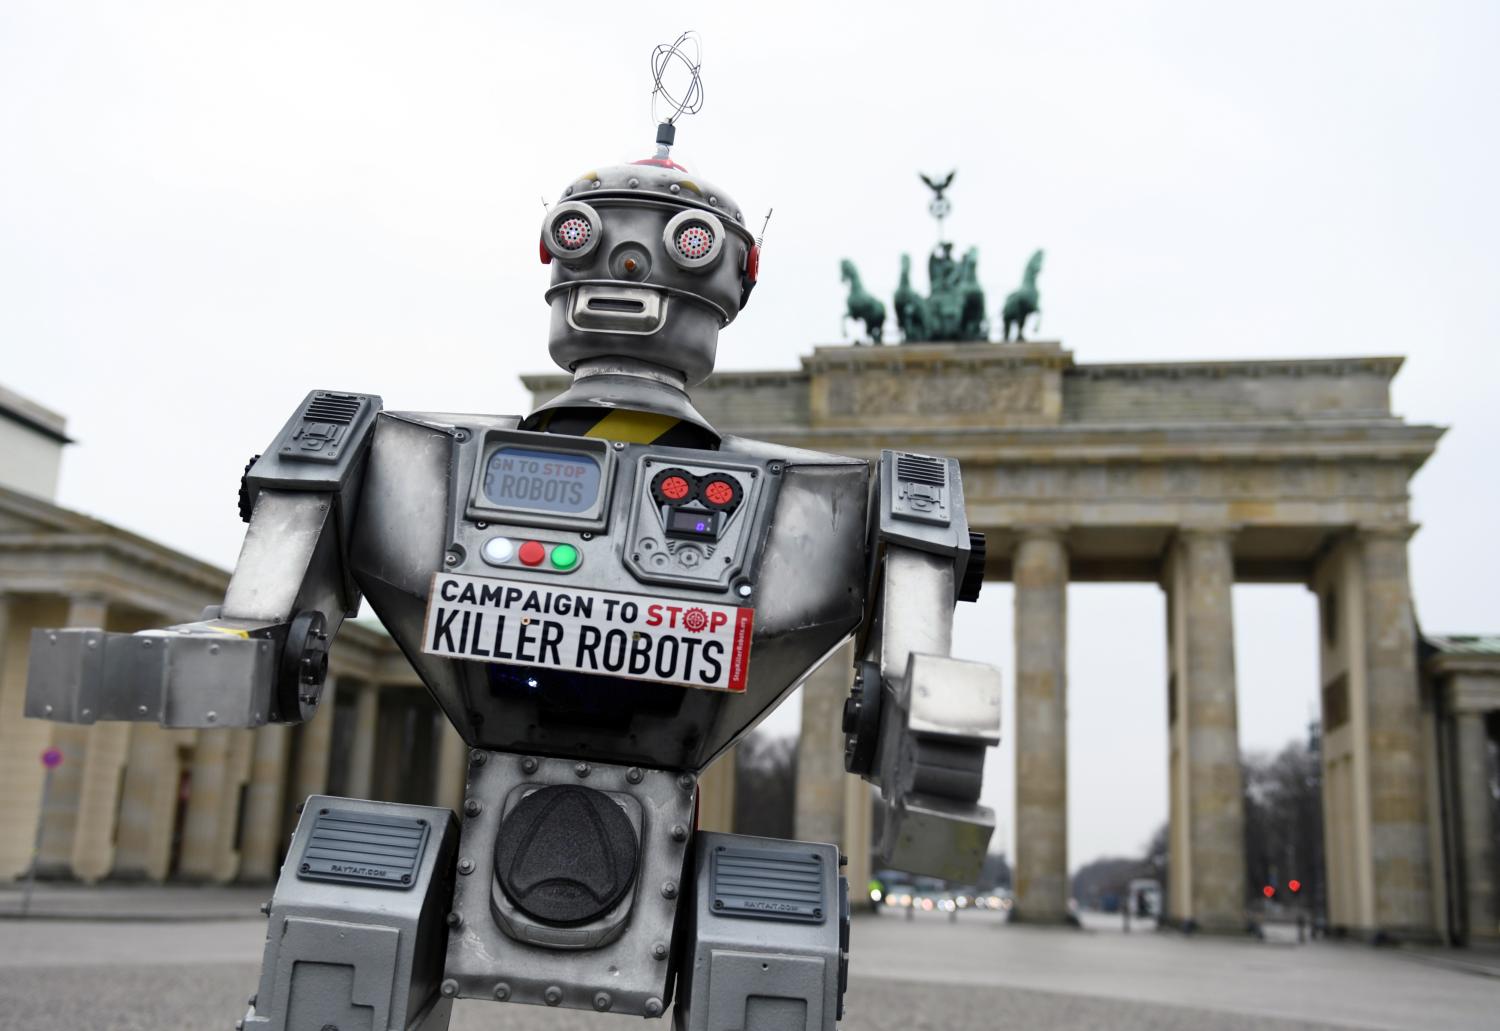 Activists from the Campaign to Stop Killer Robots, a coalition of non-governmental organisations opposing lethal autonomous weapons or so-called 'killer robots', stage a protest at Brandenburg Gate in Berlin, Germany, March, 21, 2019. REUTERS/Annegret Hilse - RC17B0F5E300